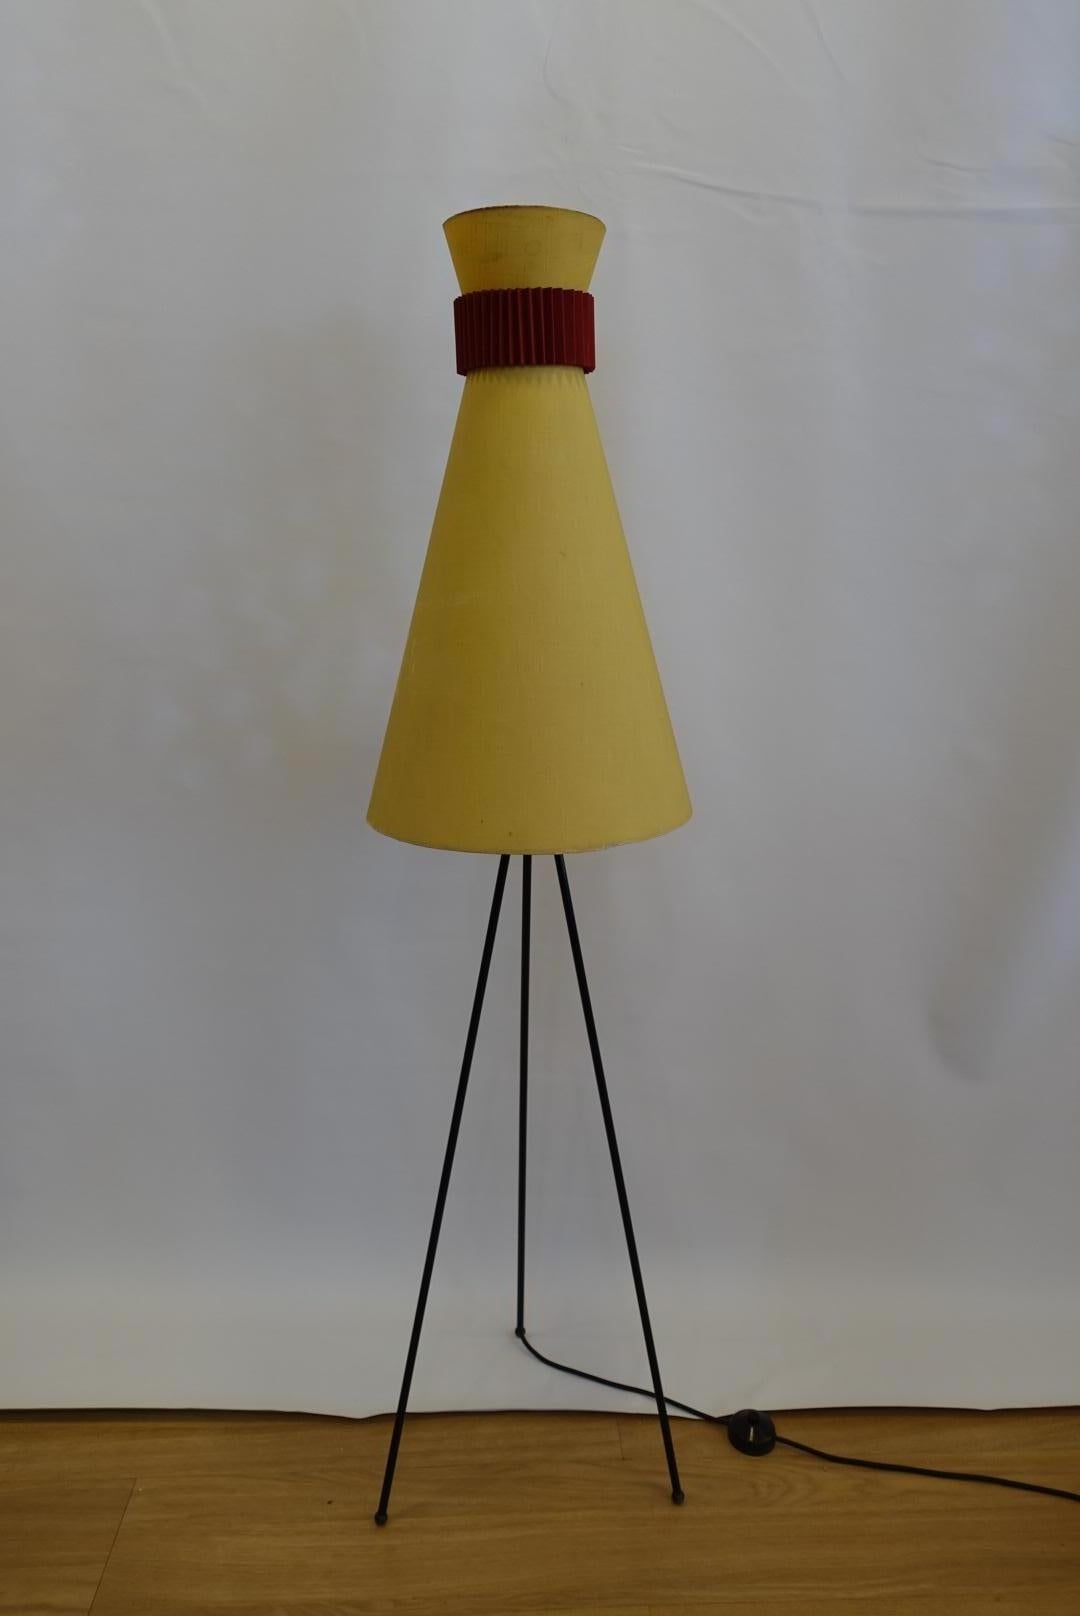 This Italian floor lamp from Luce Plan, features a yellow cotton lampshade and a black metal tripod base.
     